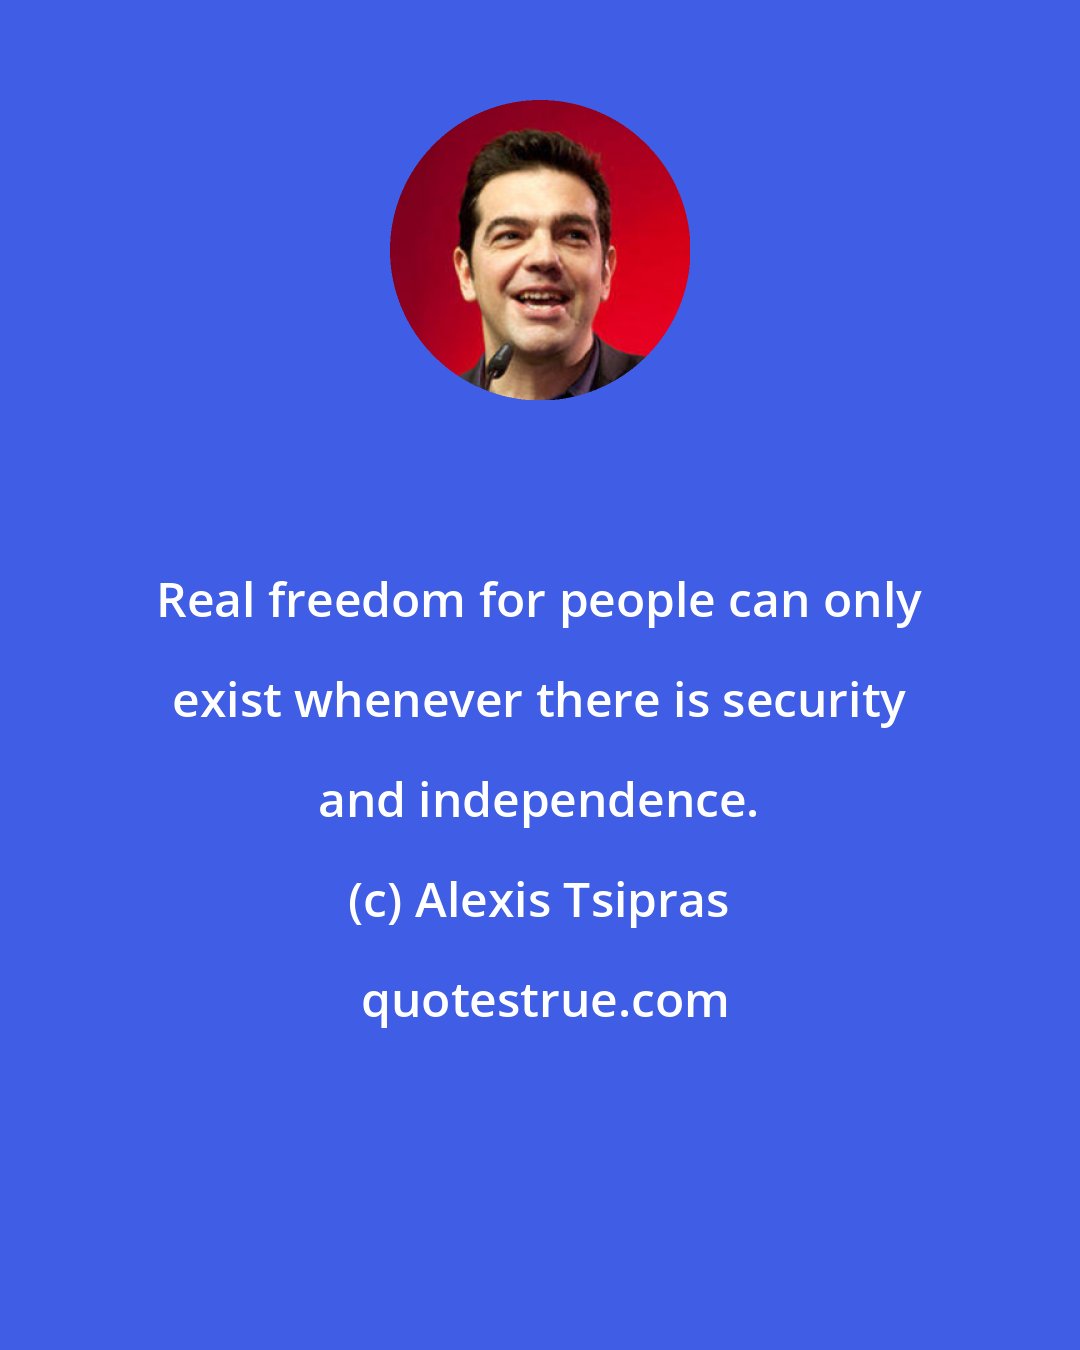 Alexis Tsipras: Real freedom for people can only exist whenever there is security and independence.